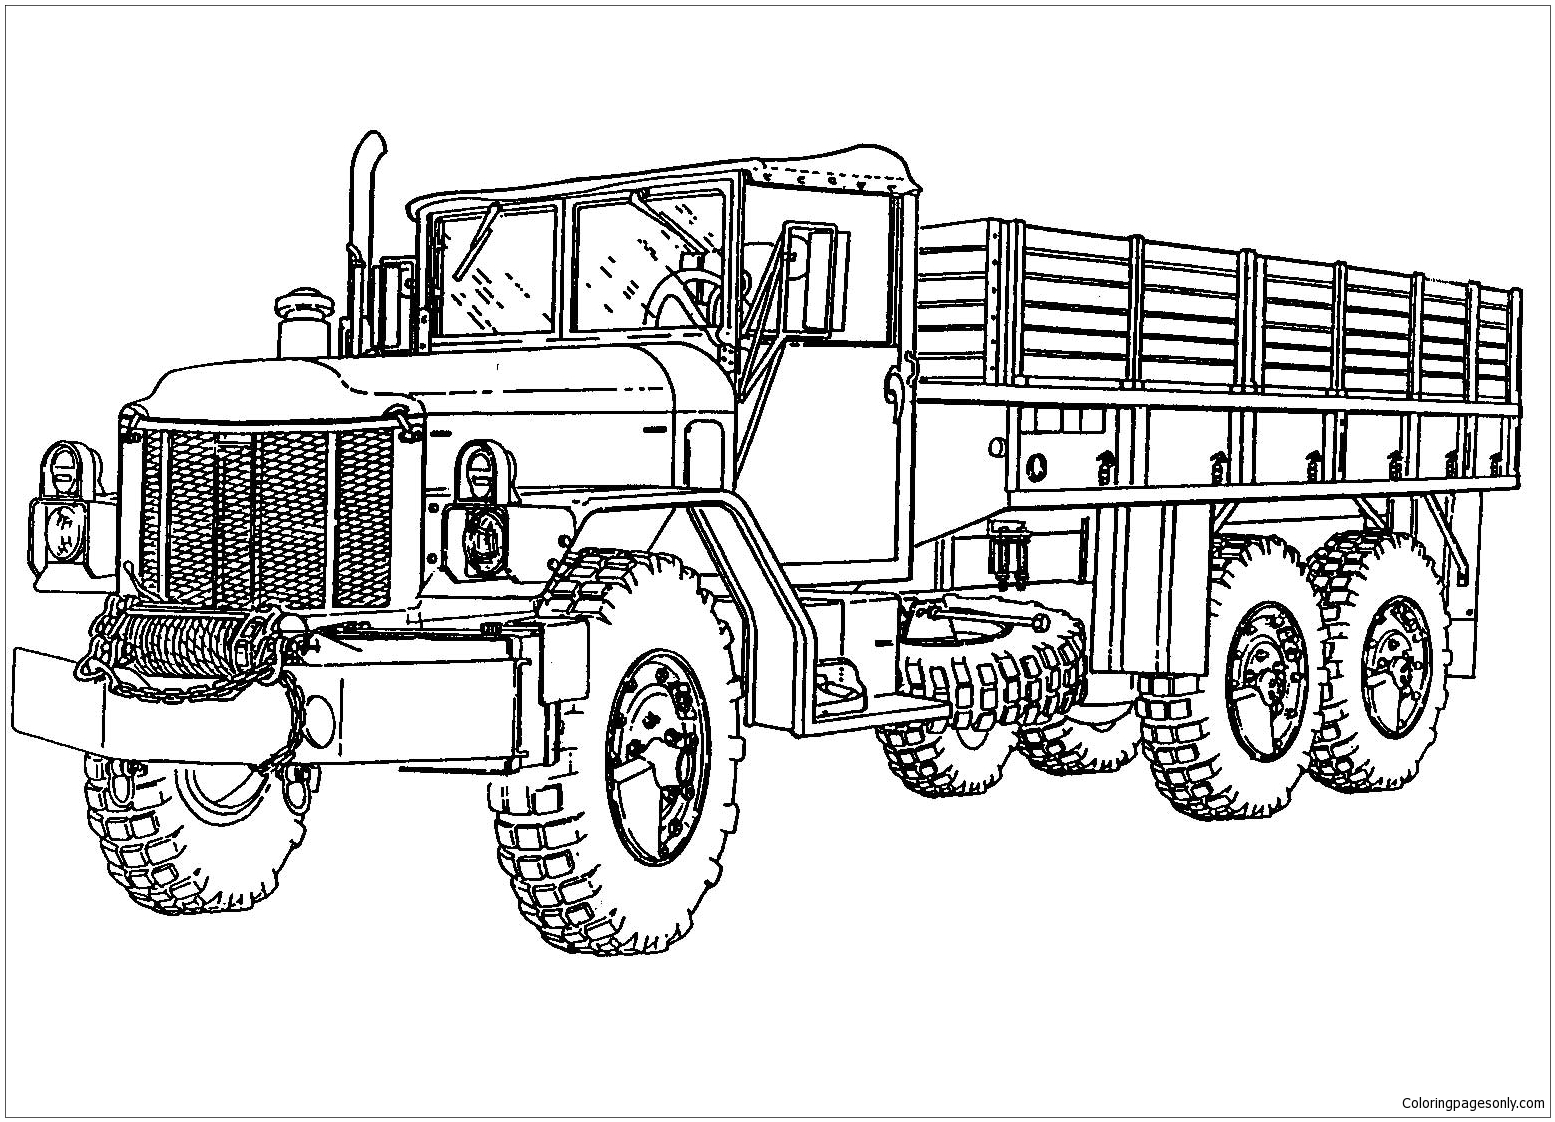 Good semi truck coloring page